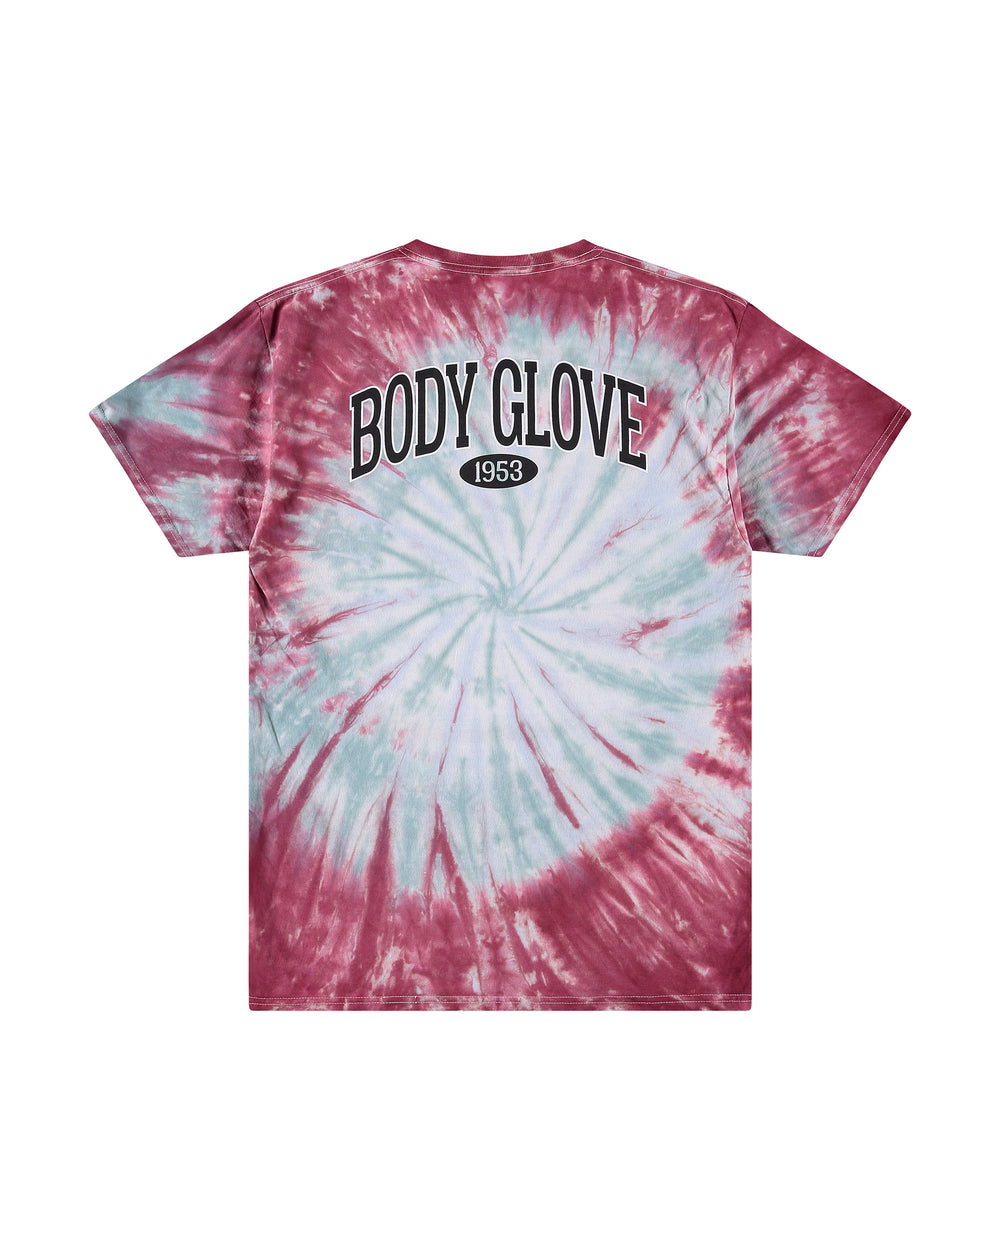 Short-Sleeved Tie-Dyed T-Shirt - Jade